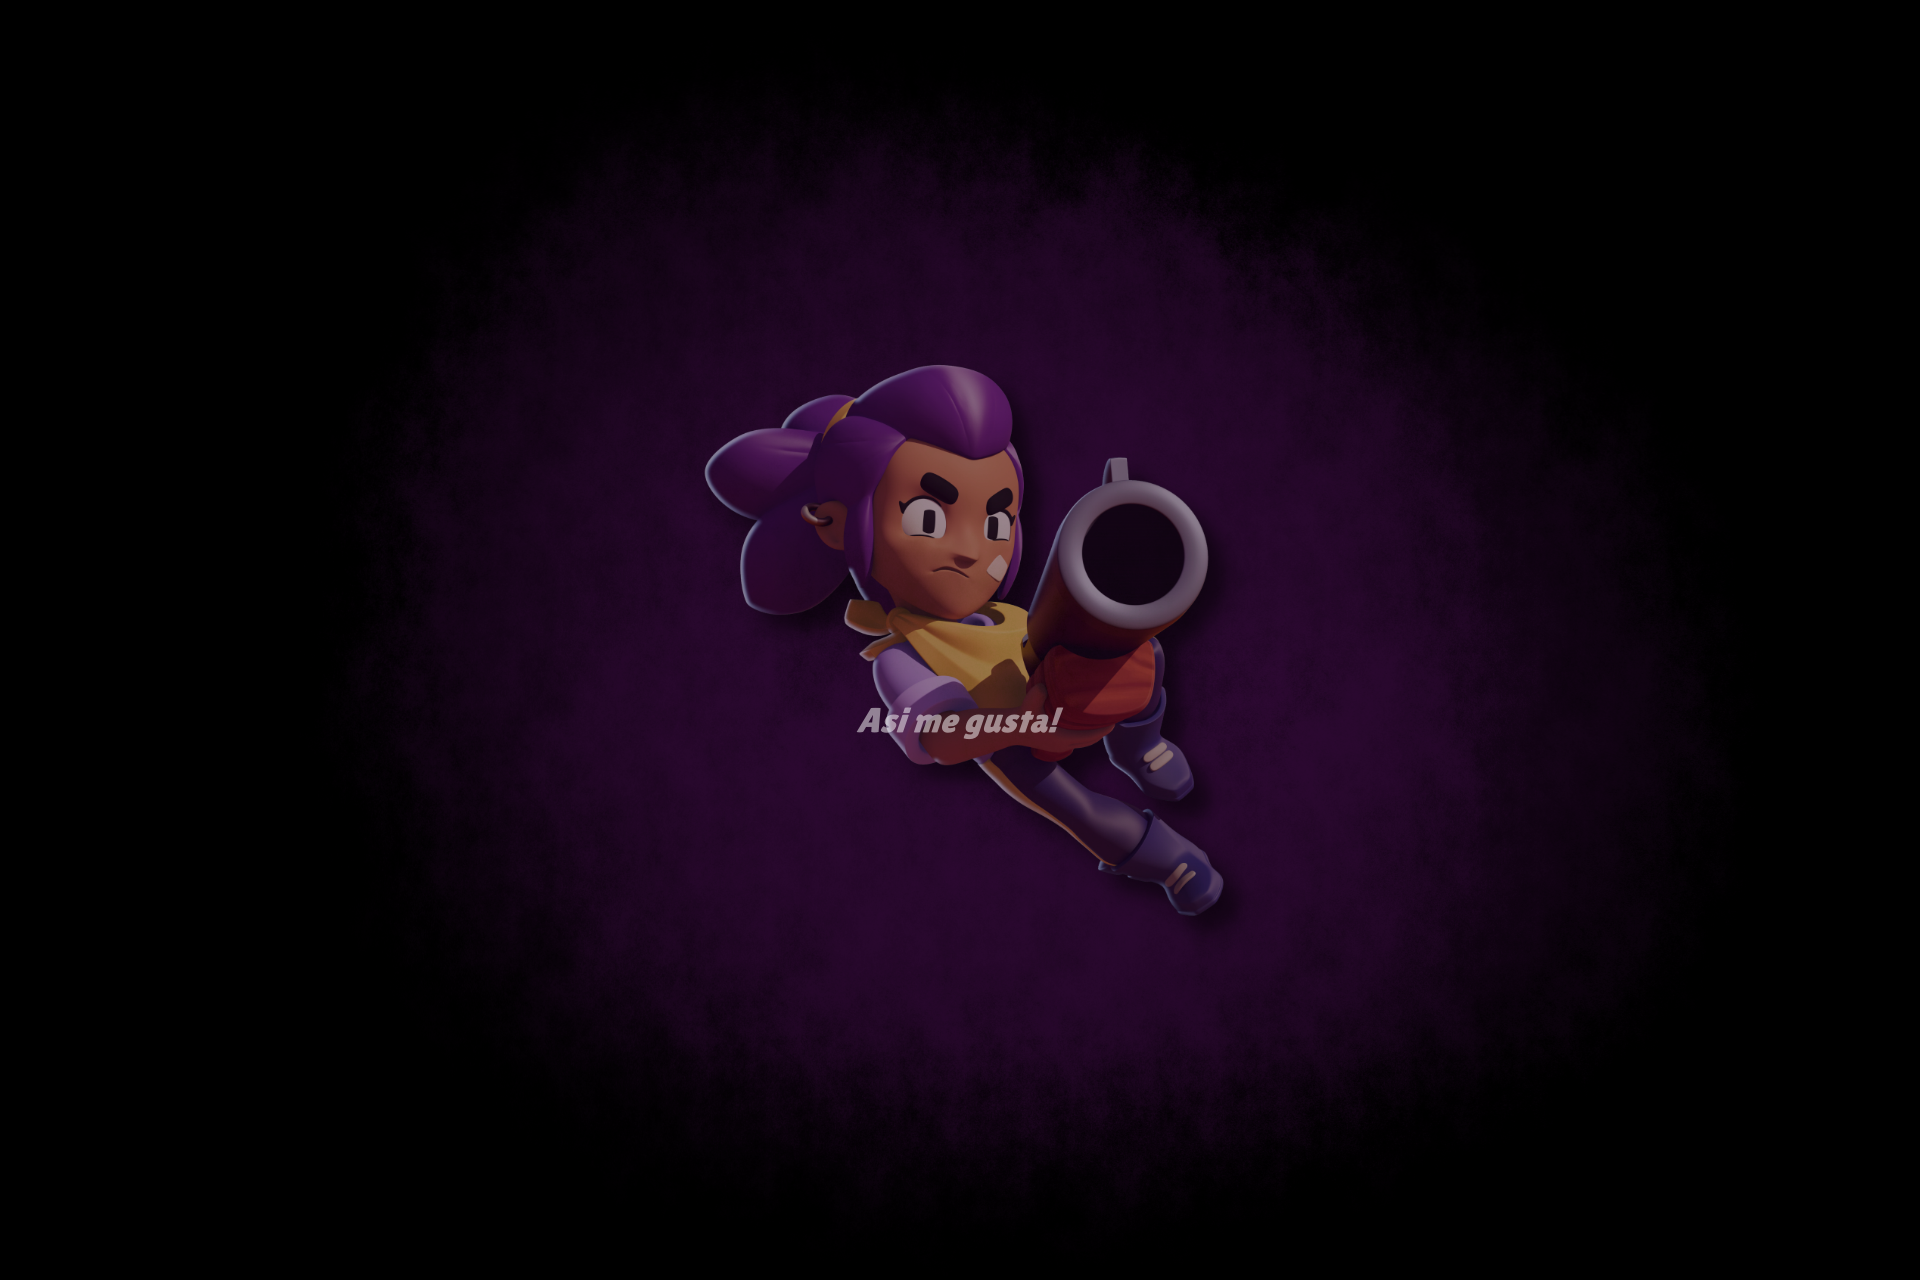 Shelly Brawl Stars Wallpapers Wallpaper Cave - imagens shelly brawl stars png atual